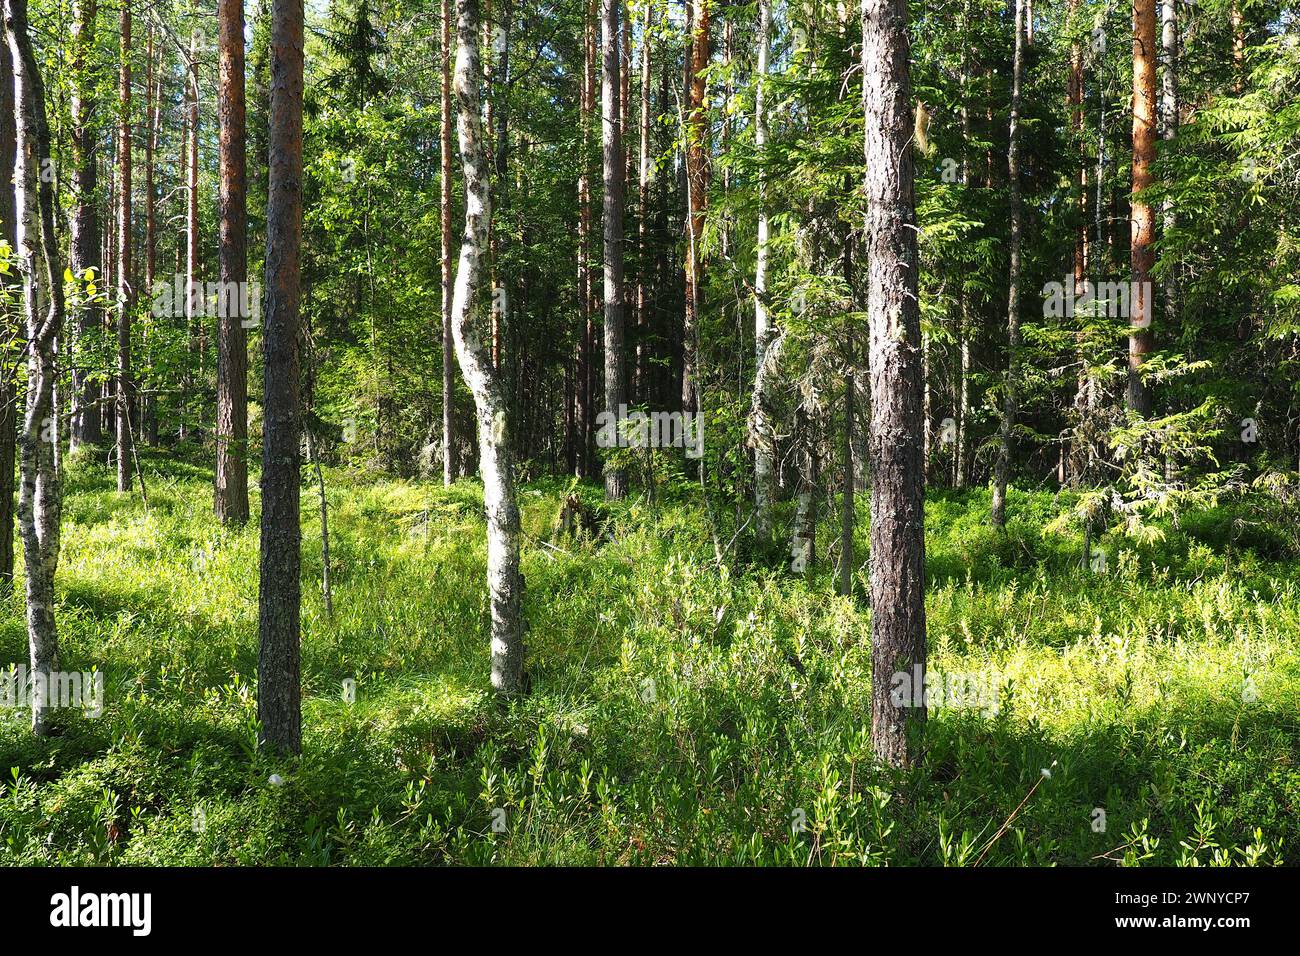 Taiga biome dominated by coniferous forests. Picea spruce, genus of coniferous evergreen trees in the Pine family Pinaceae. Russia, Karelia, Orzega Stock Photo